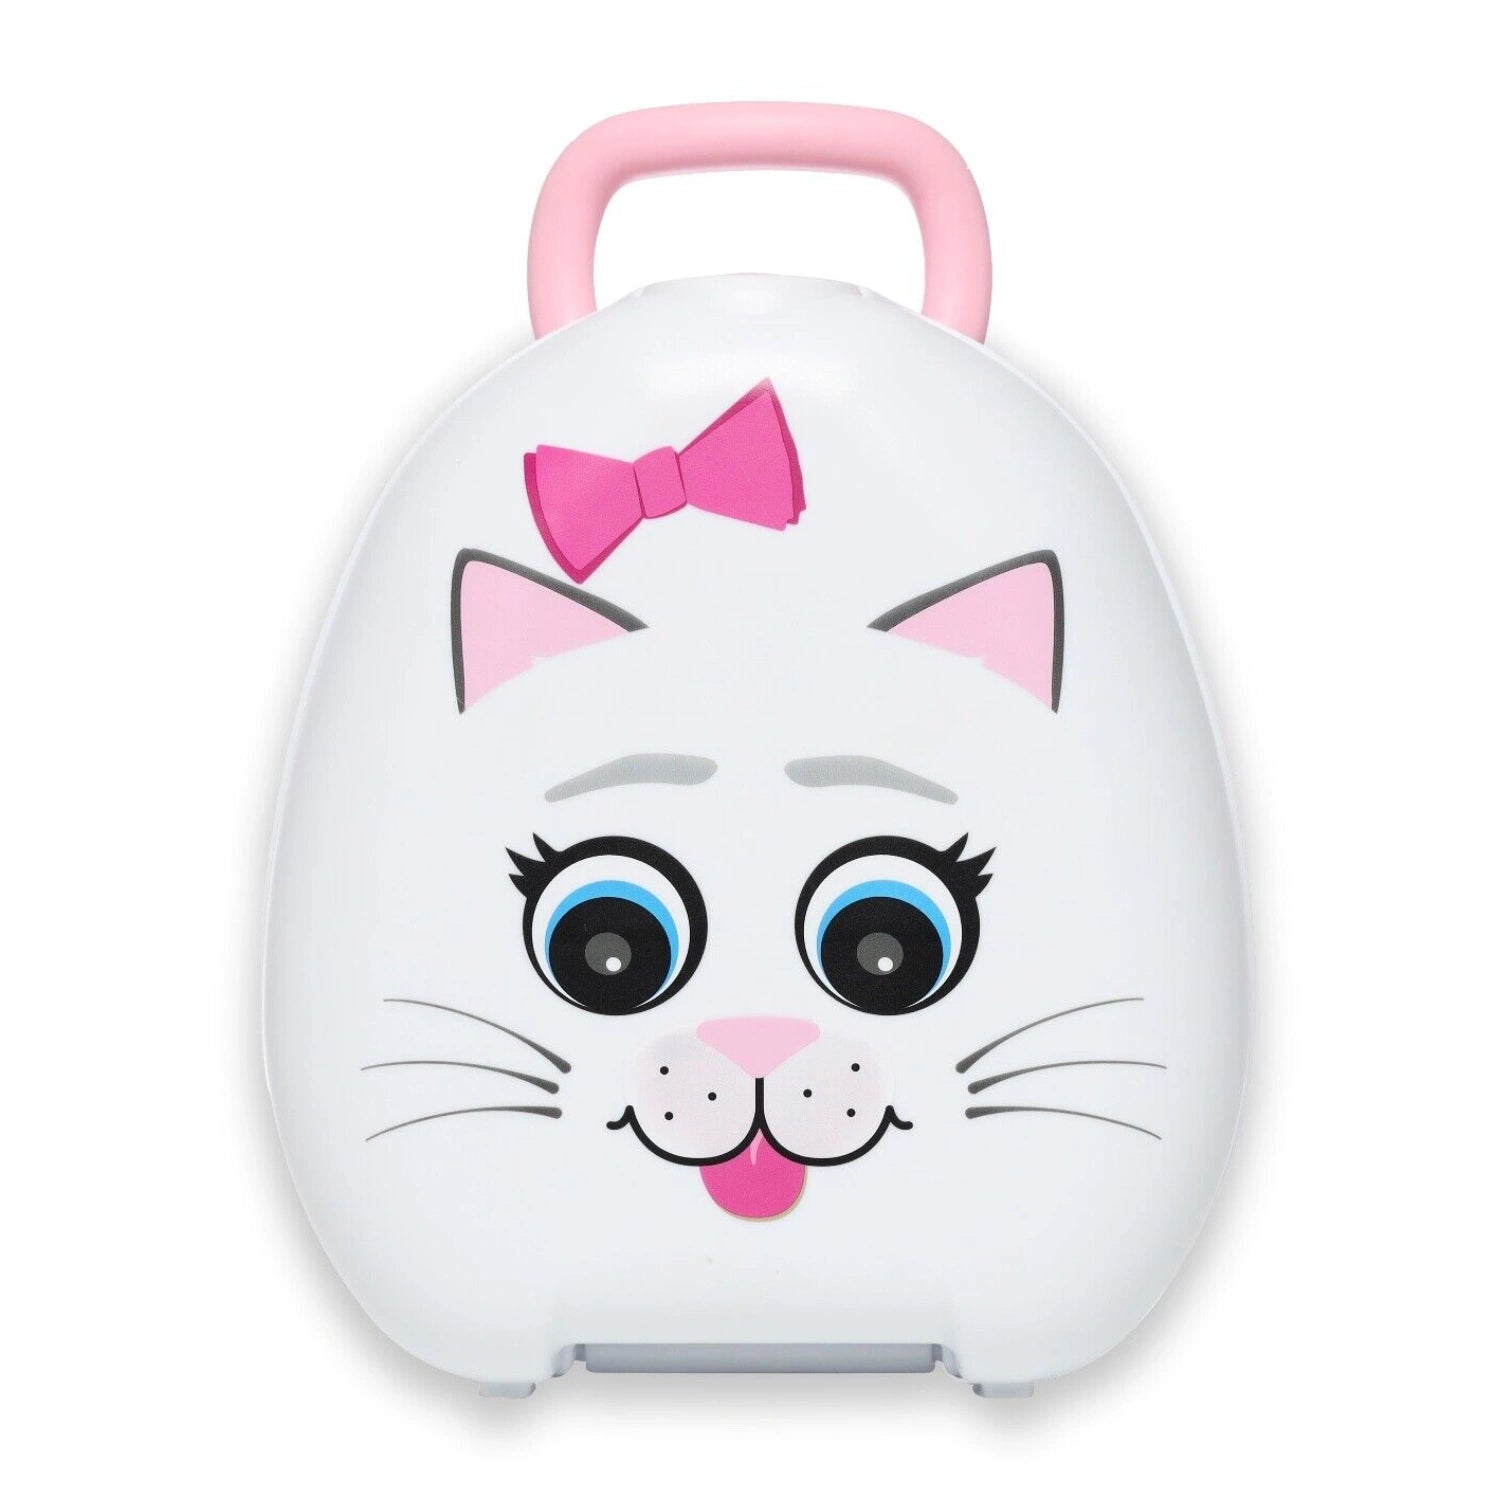 An image of Buy Portable Travel Potty from My Carry Potty Cat